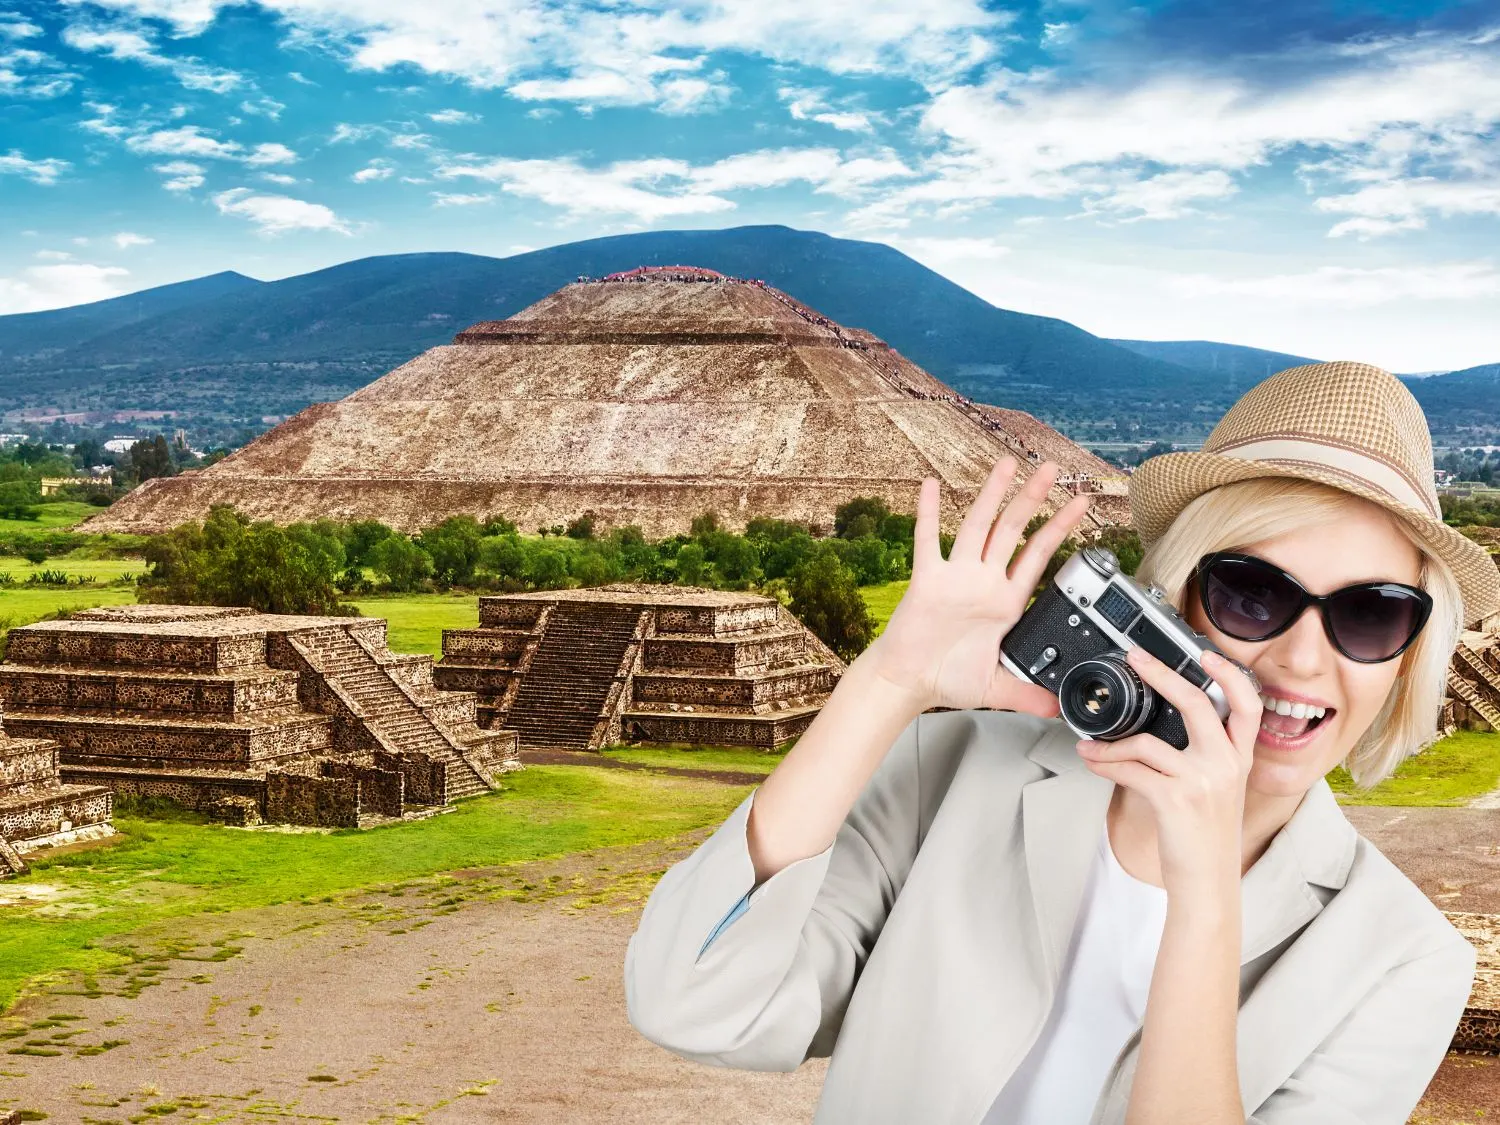 The 6 Best Mexico Tours For Unforgettable Adventures That Are Achievable & Affordable!